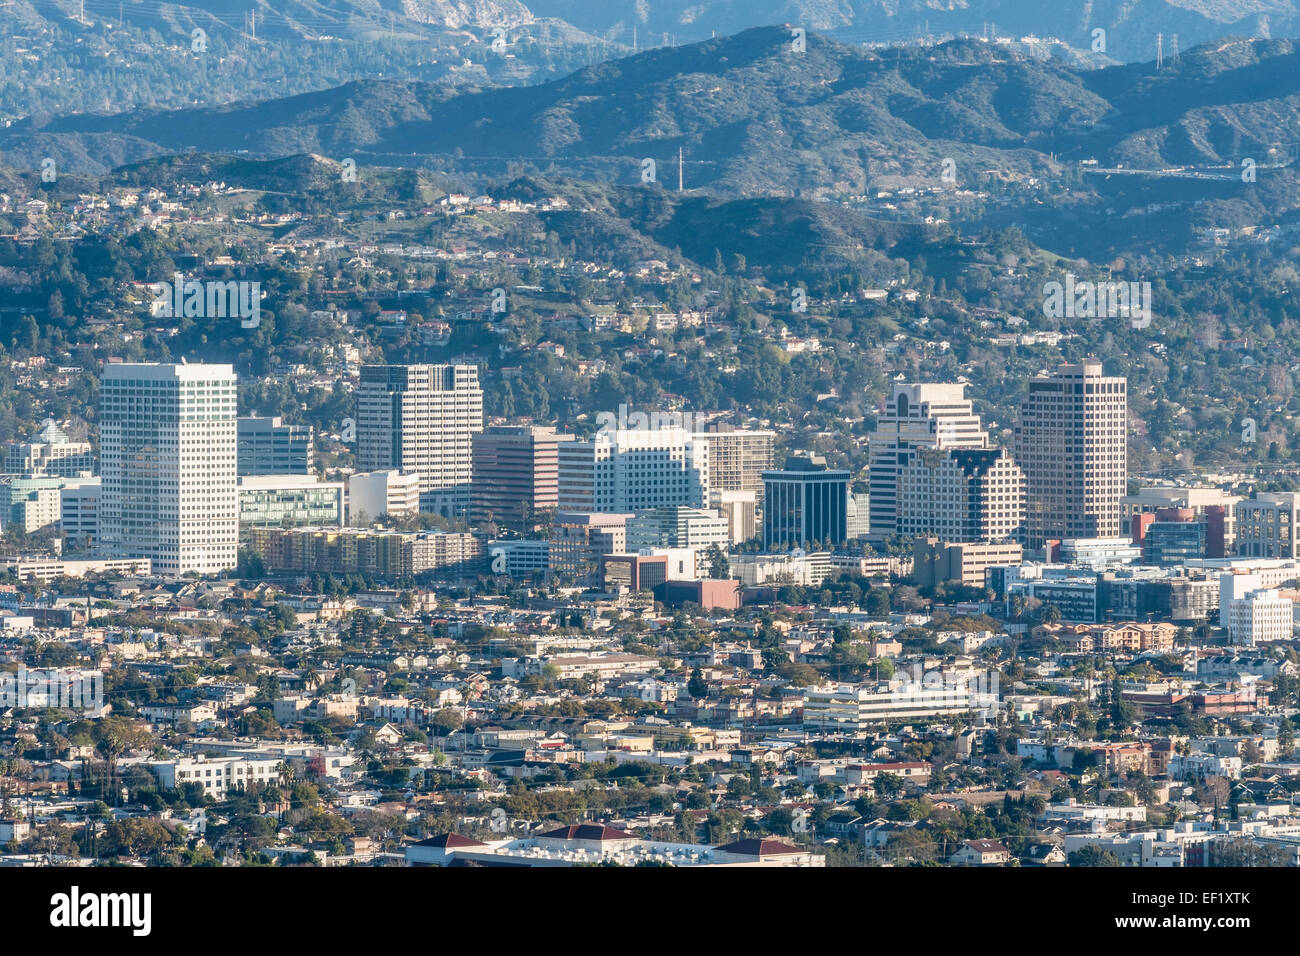 Downtown Glendale next to Los Angeles in southern California. Stock Photo